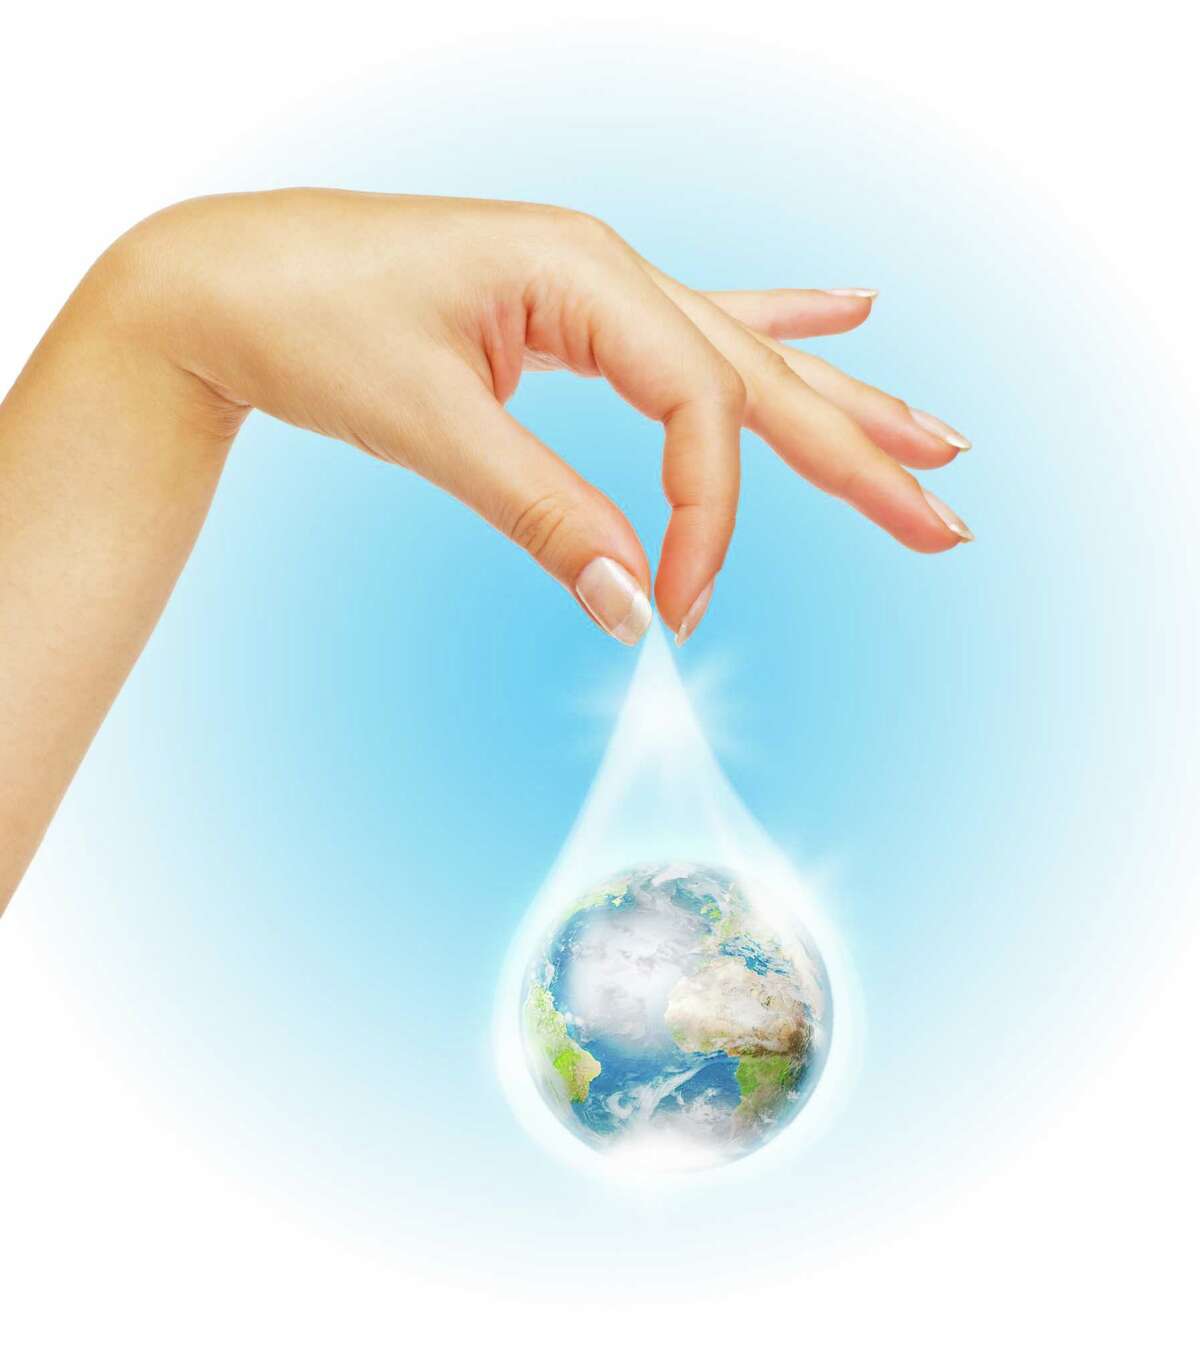 Drop of water with Earth inside and hand. The symbol of Save Planet